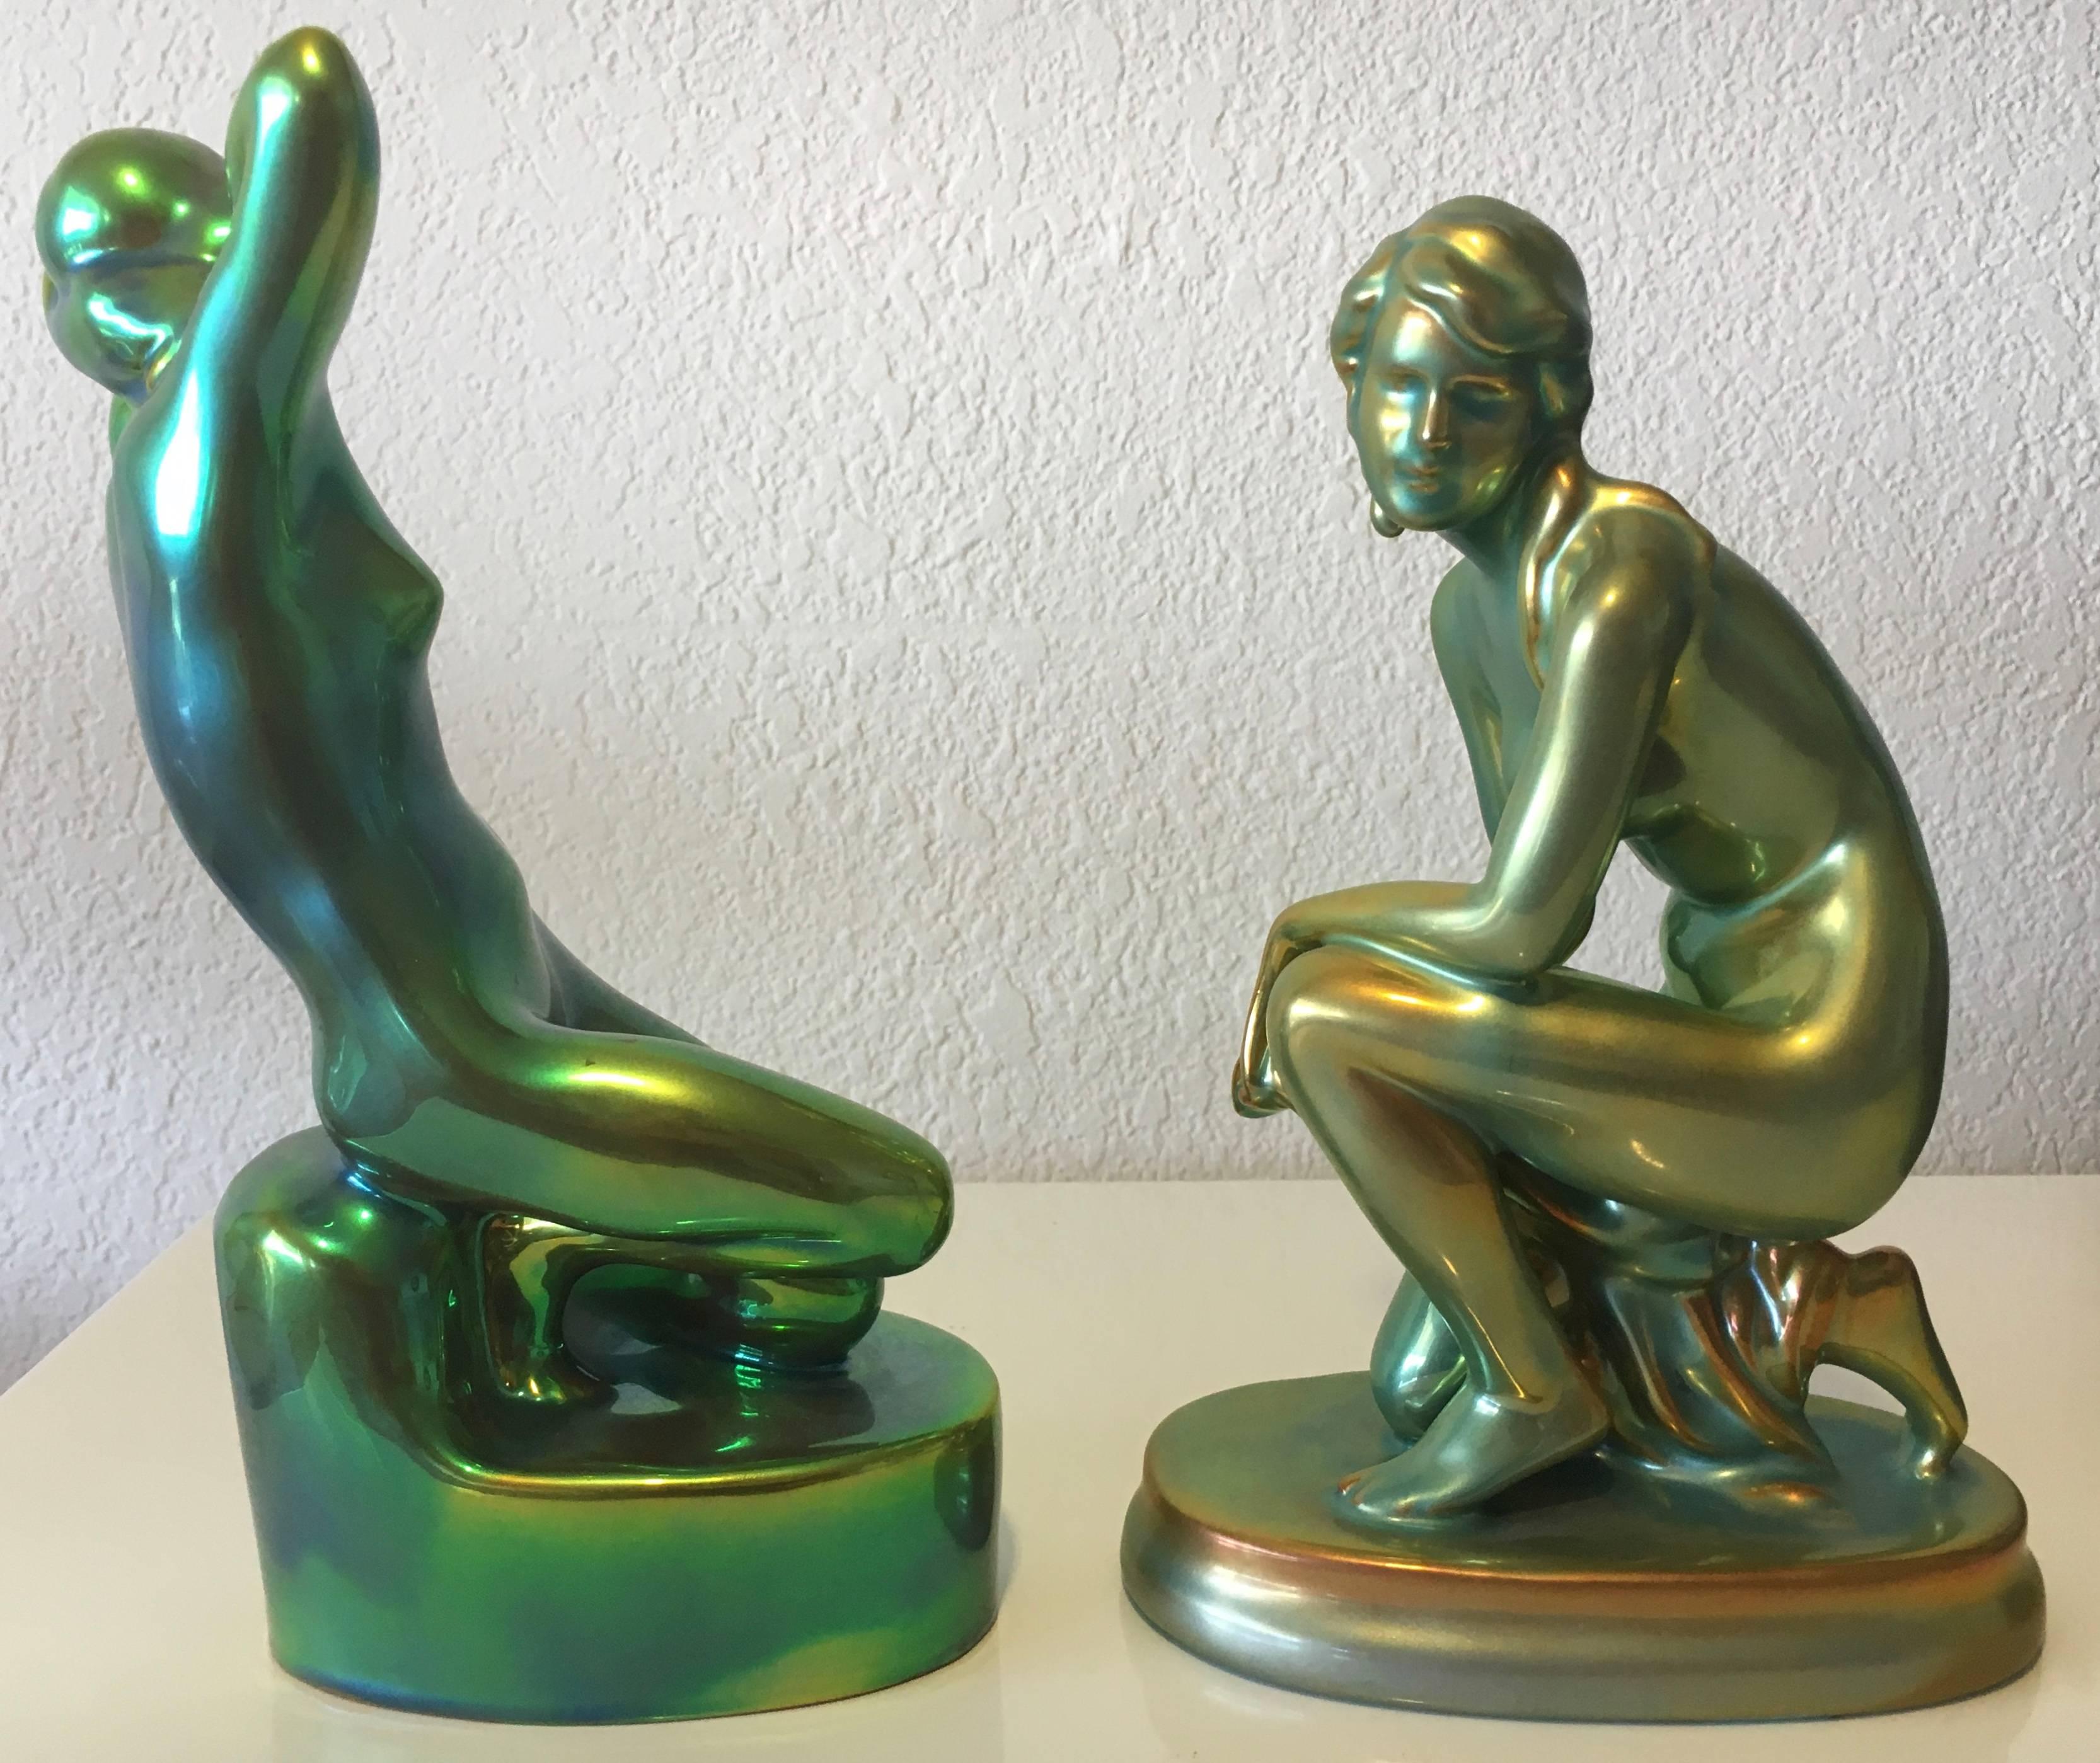 Hungarian Antique Zsolnay Eosin Iridescent Art Nouveau, Pair of Nude Women Figurines For Sale